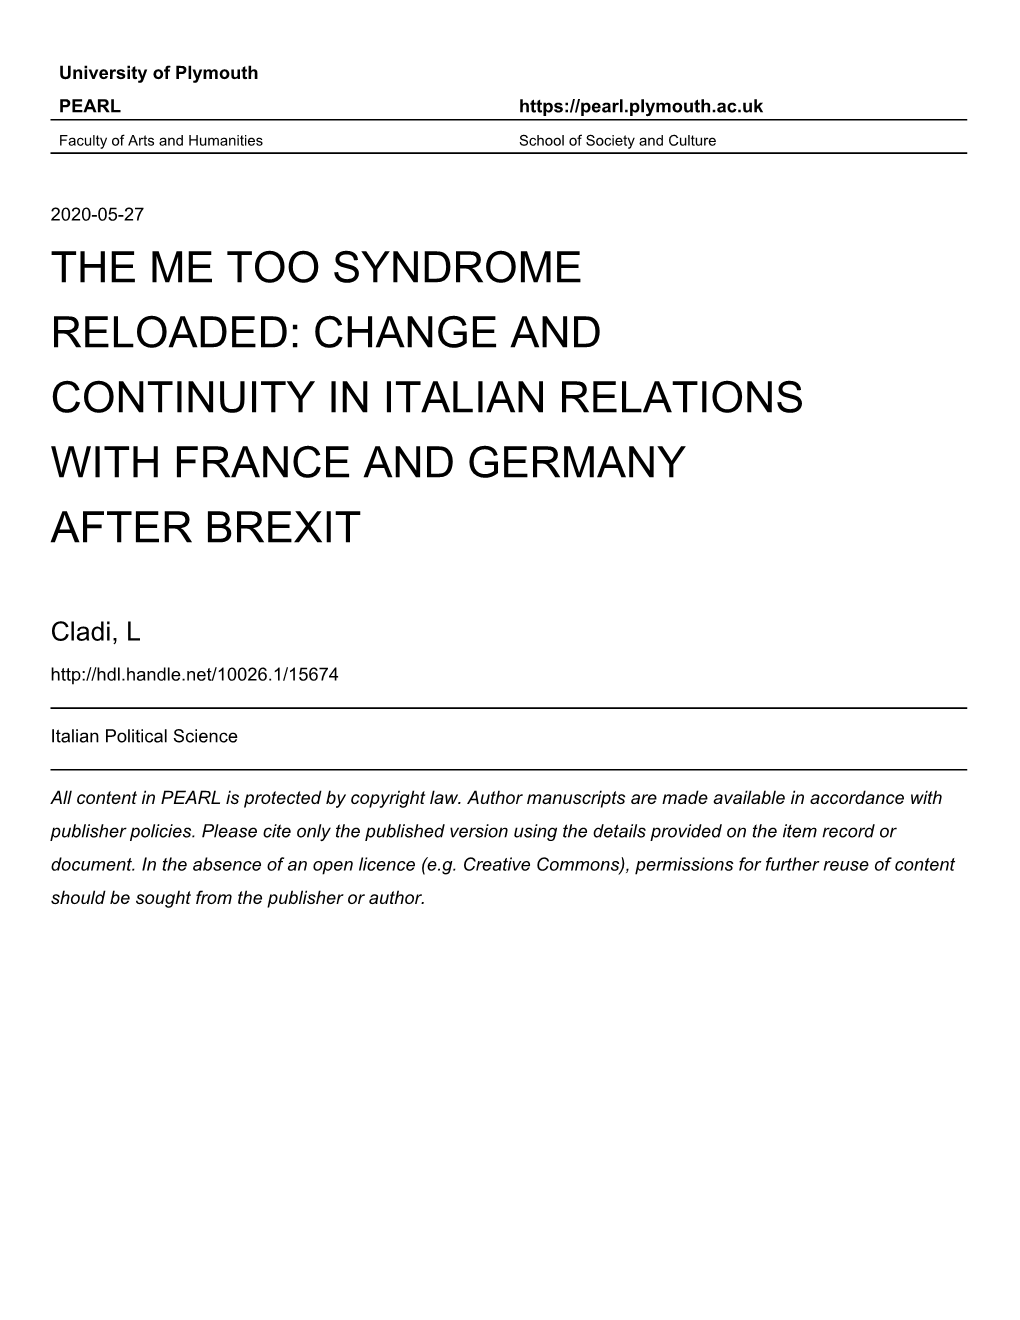 The Me Too Syndrome Reloaded: Change and Continuity in Italian Relations with France and Germany After Brexit